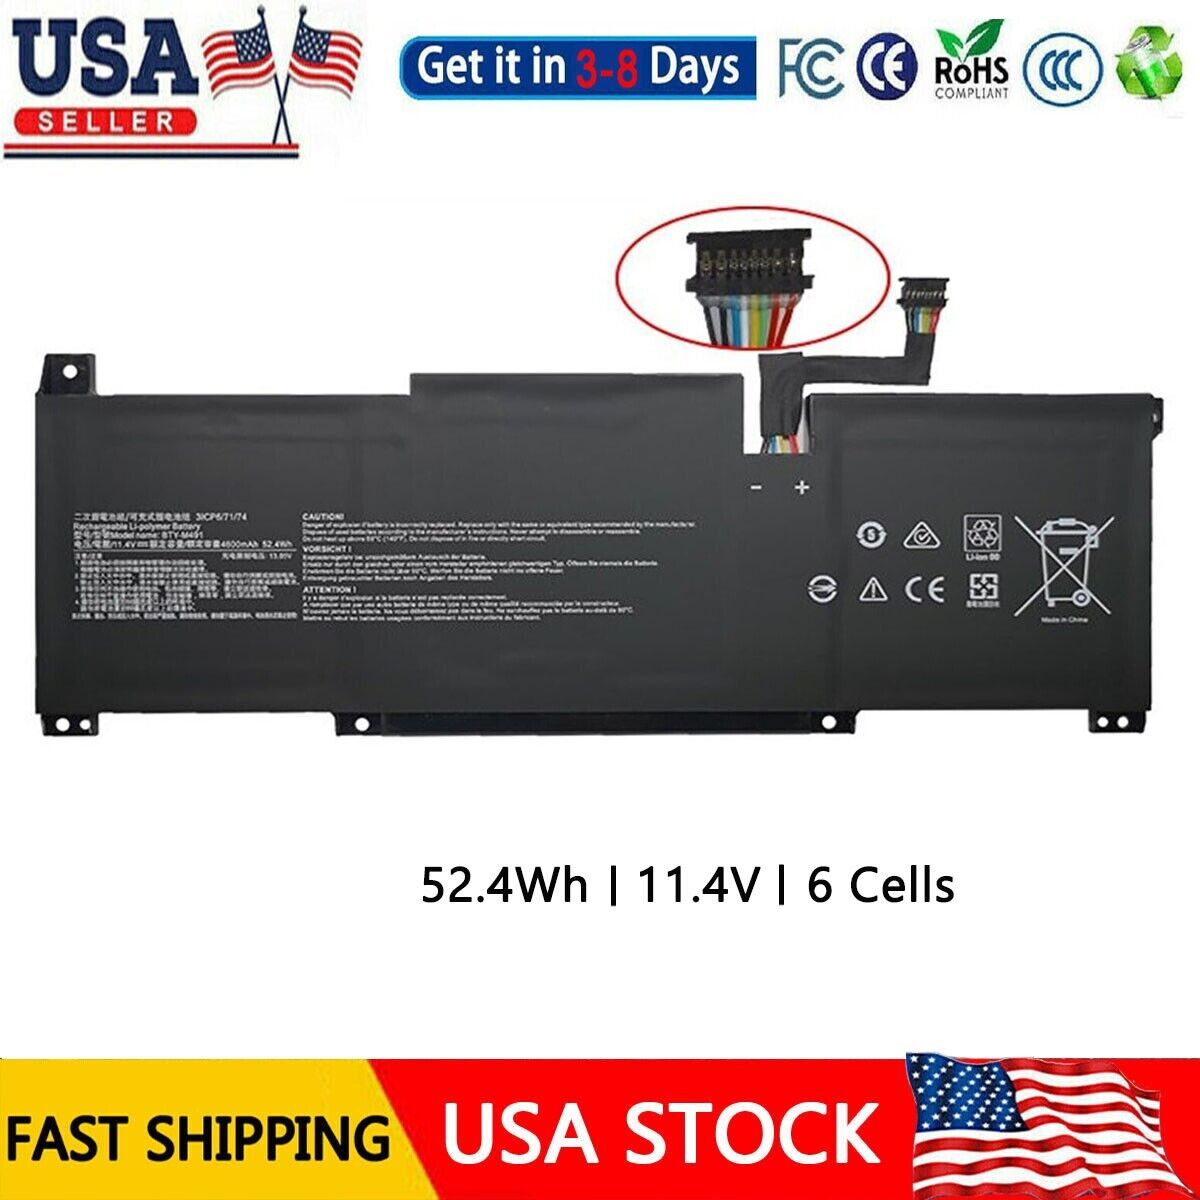 BTY-M491 Battery for MSI Modern 15 A10RB 15 A10RB-041TW 3ICP6/71/74 NEW 52.4Wh